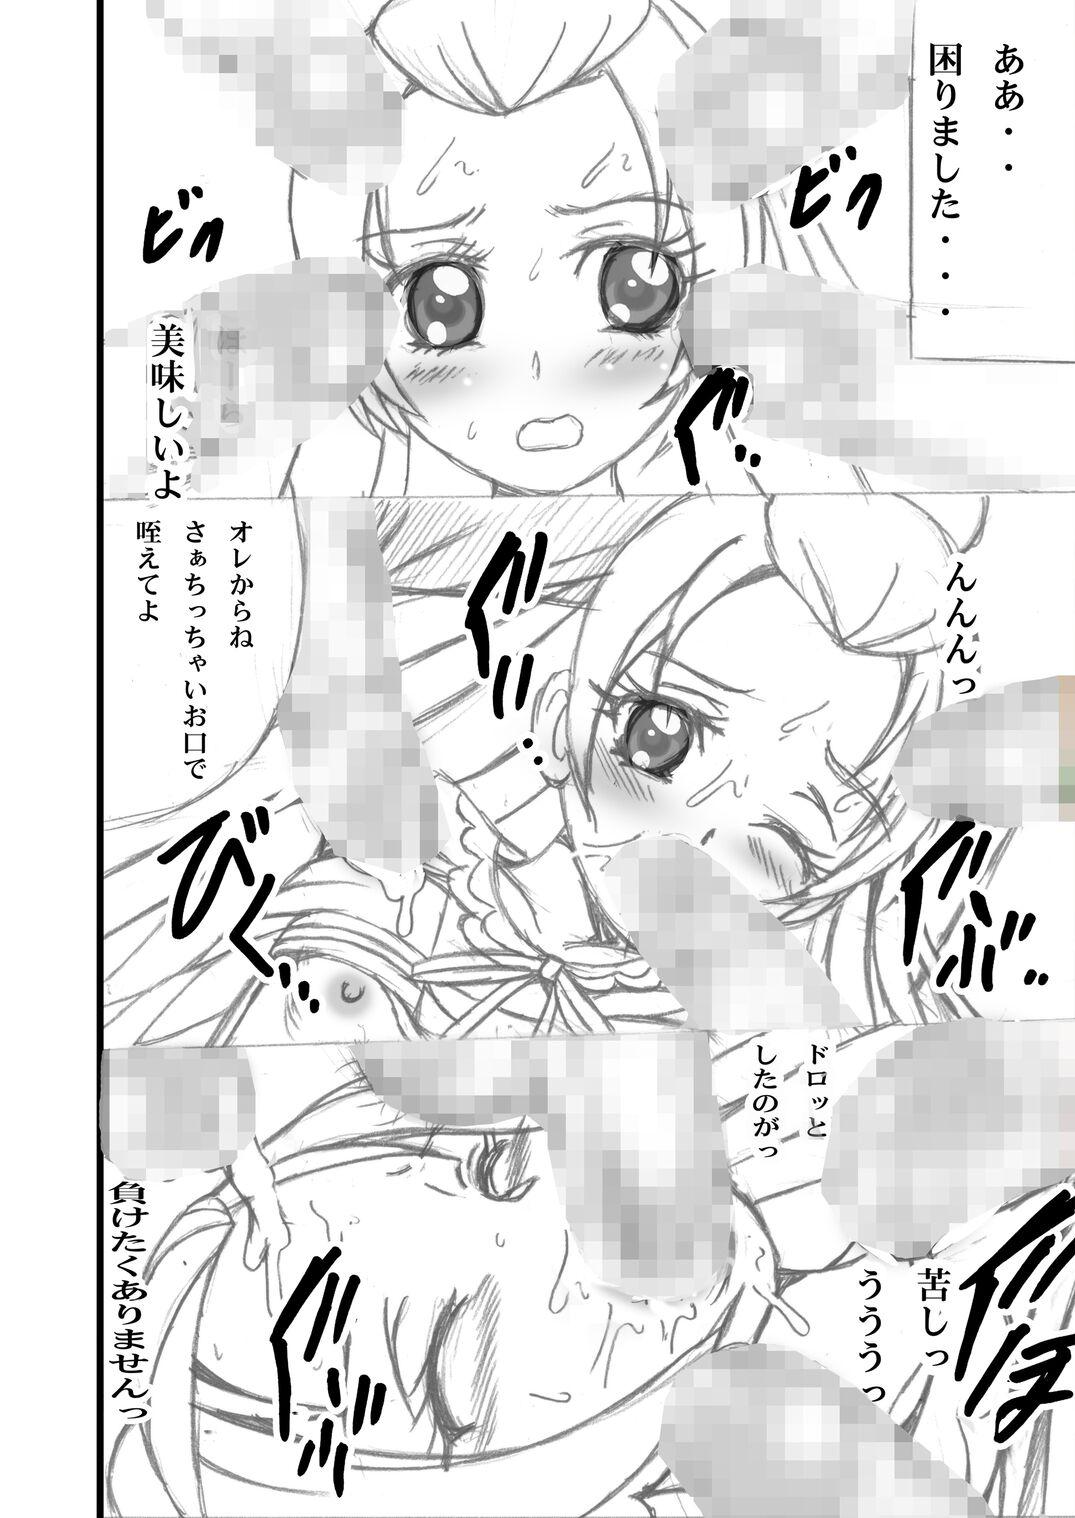 Ladyboy Cure Cure Love Link 3.48 - Dokidoki precure Punished - Page 5